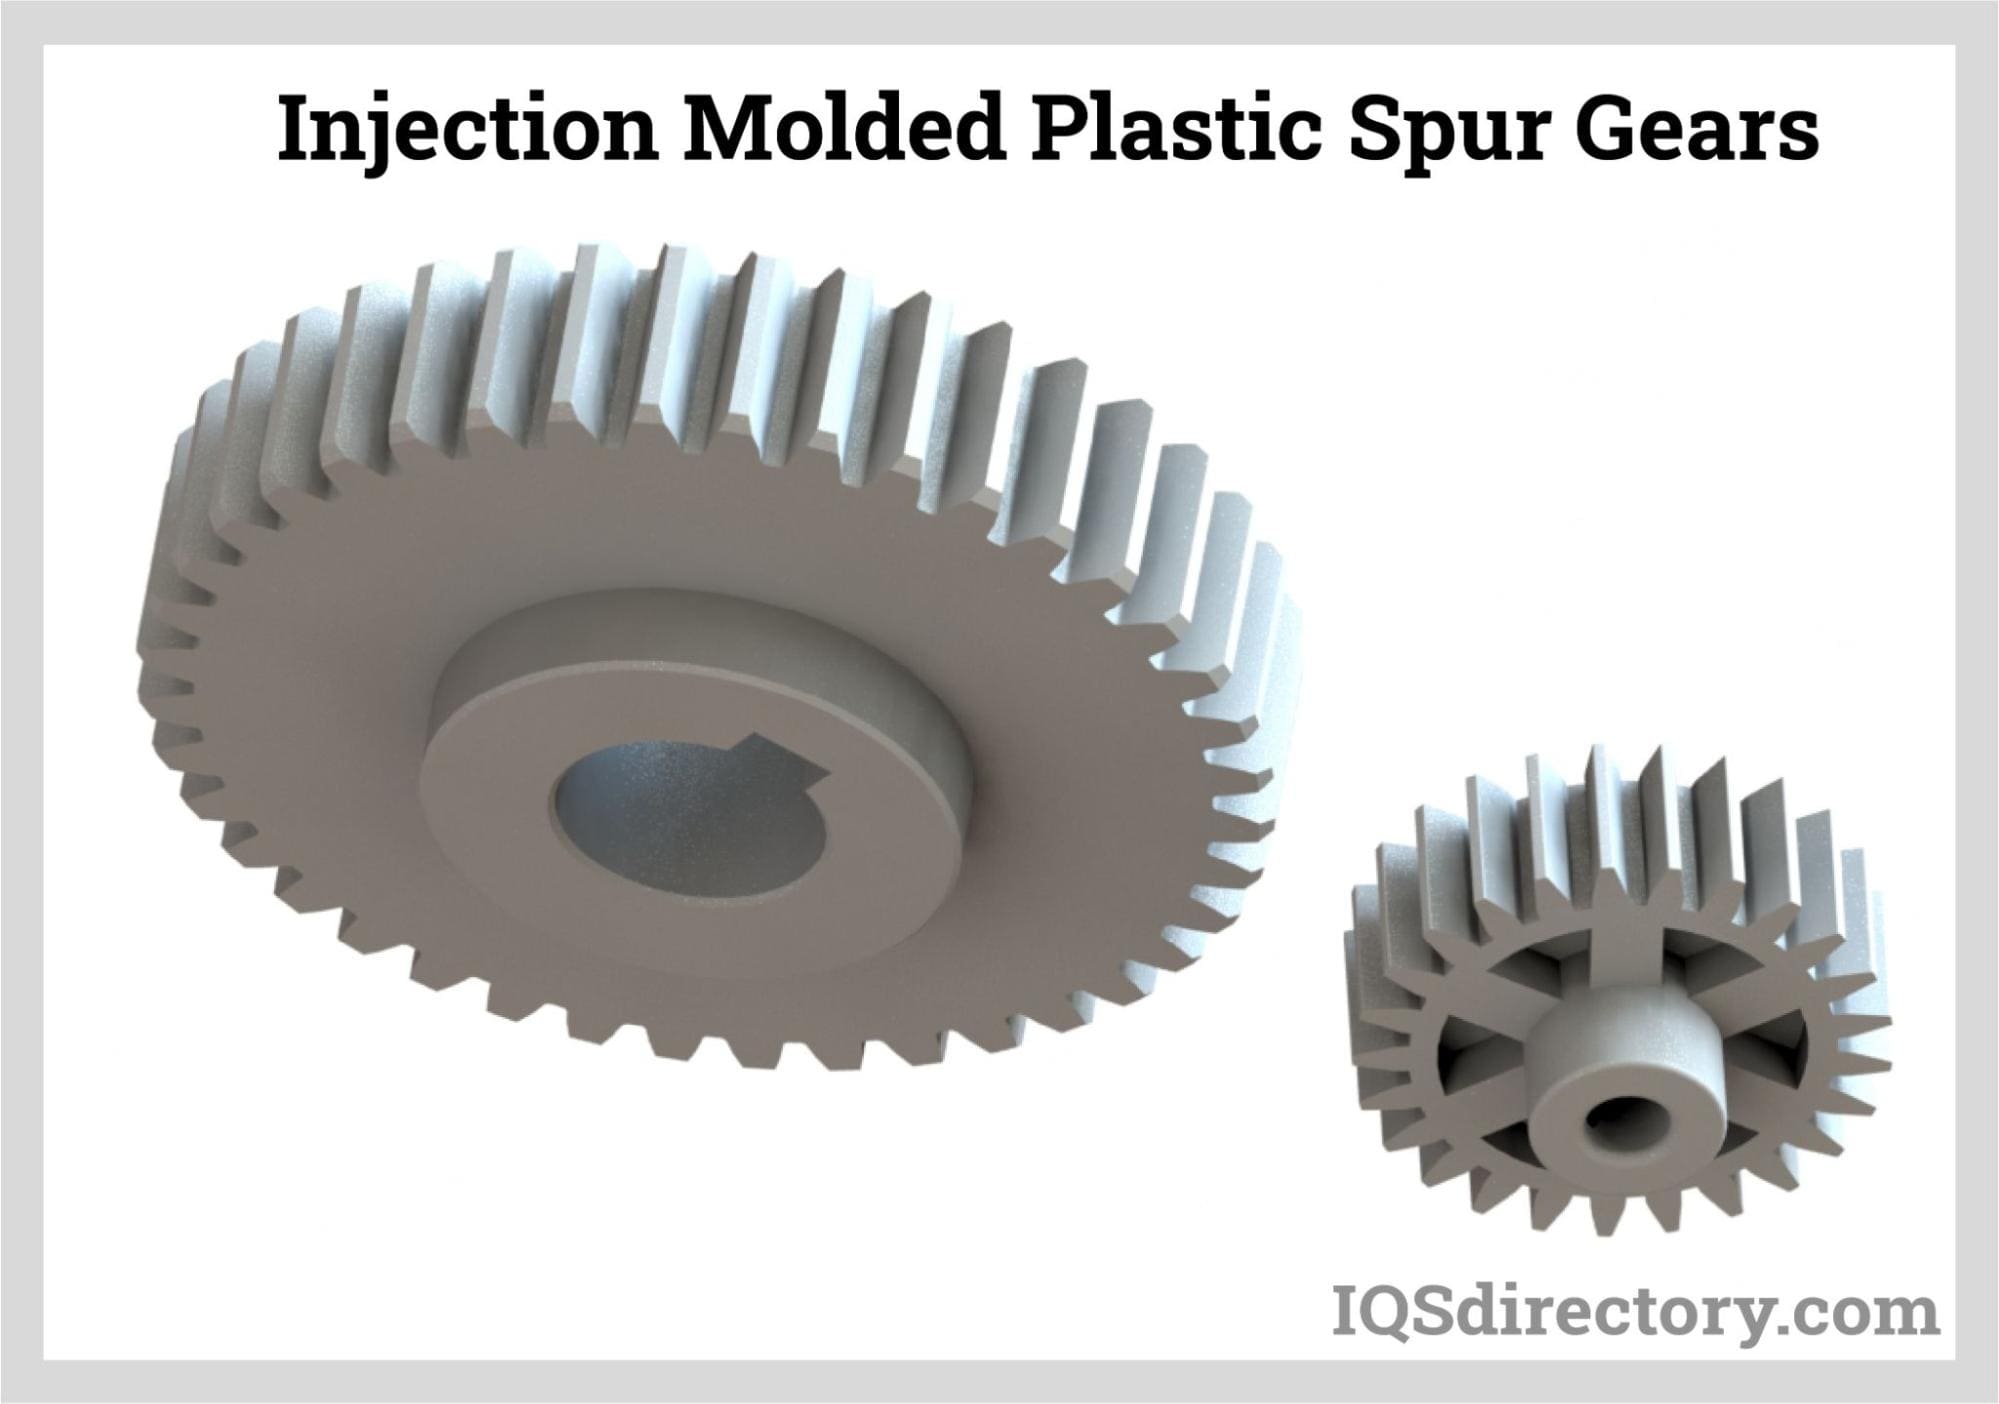  Injection Molded Plastic Spur Gears